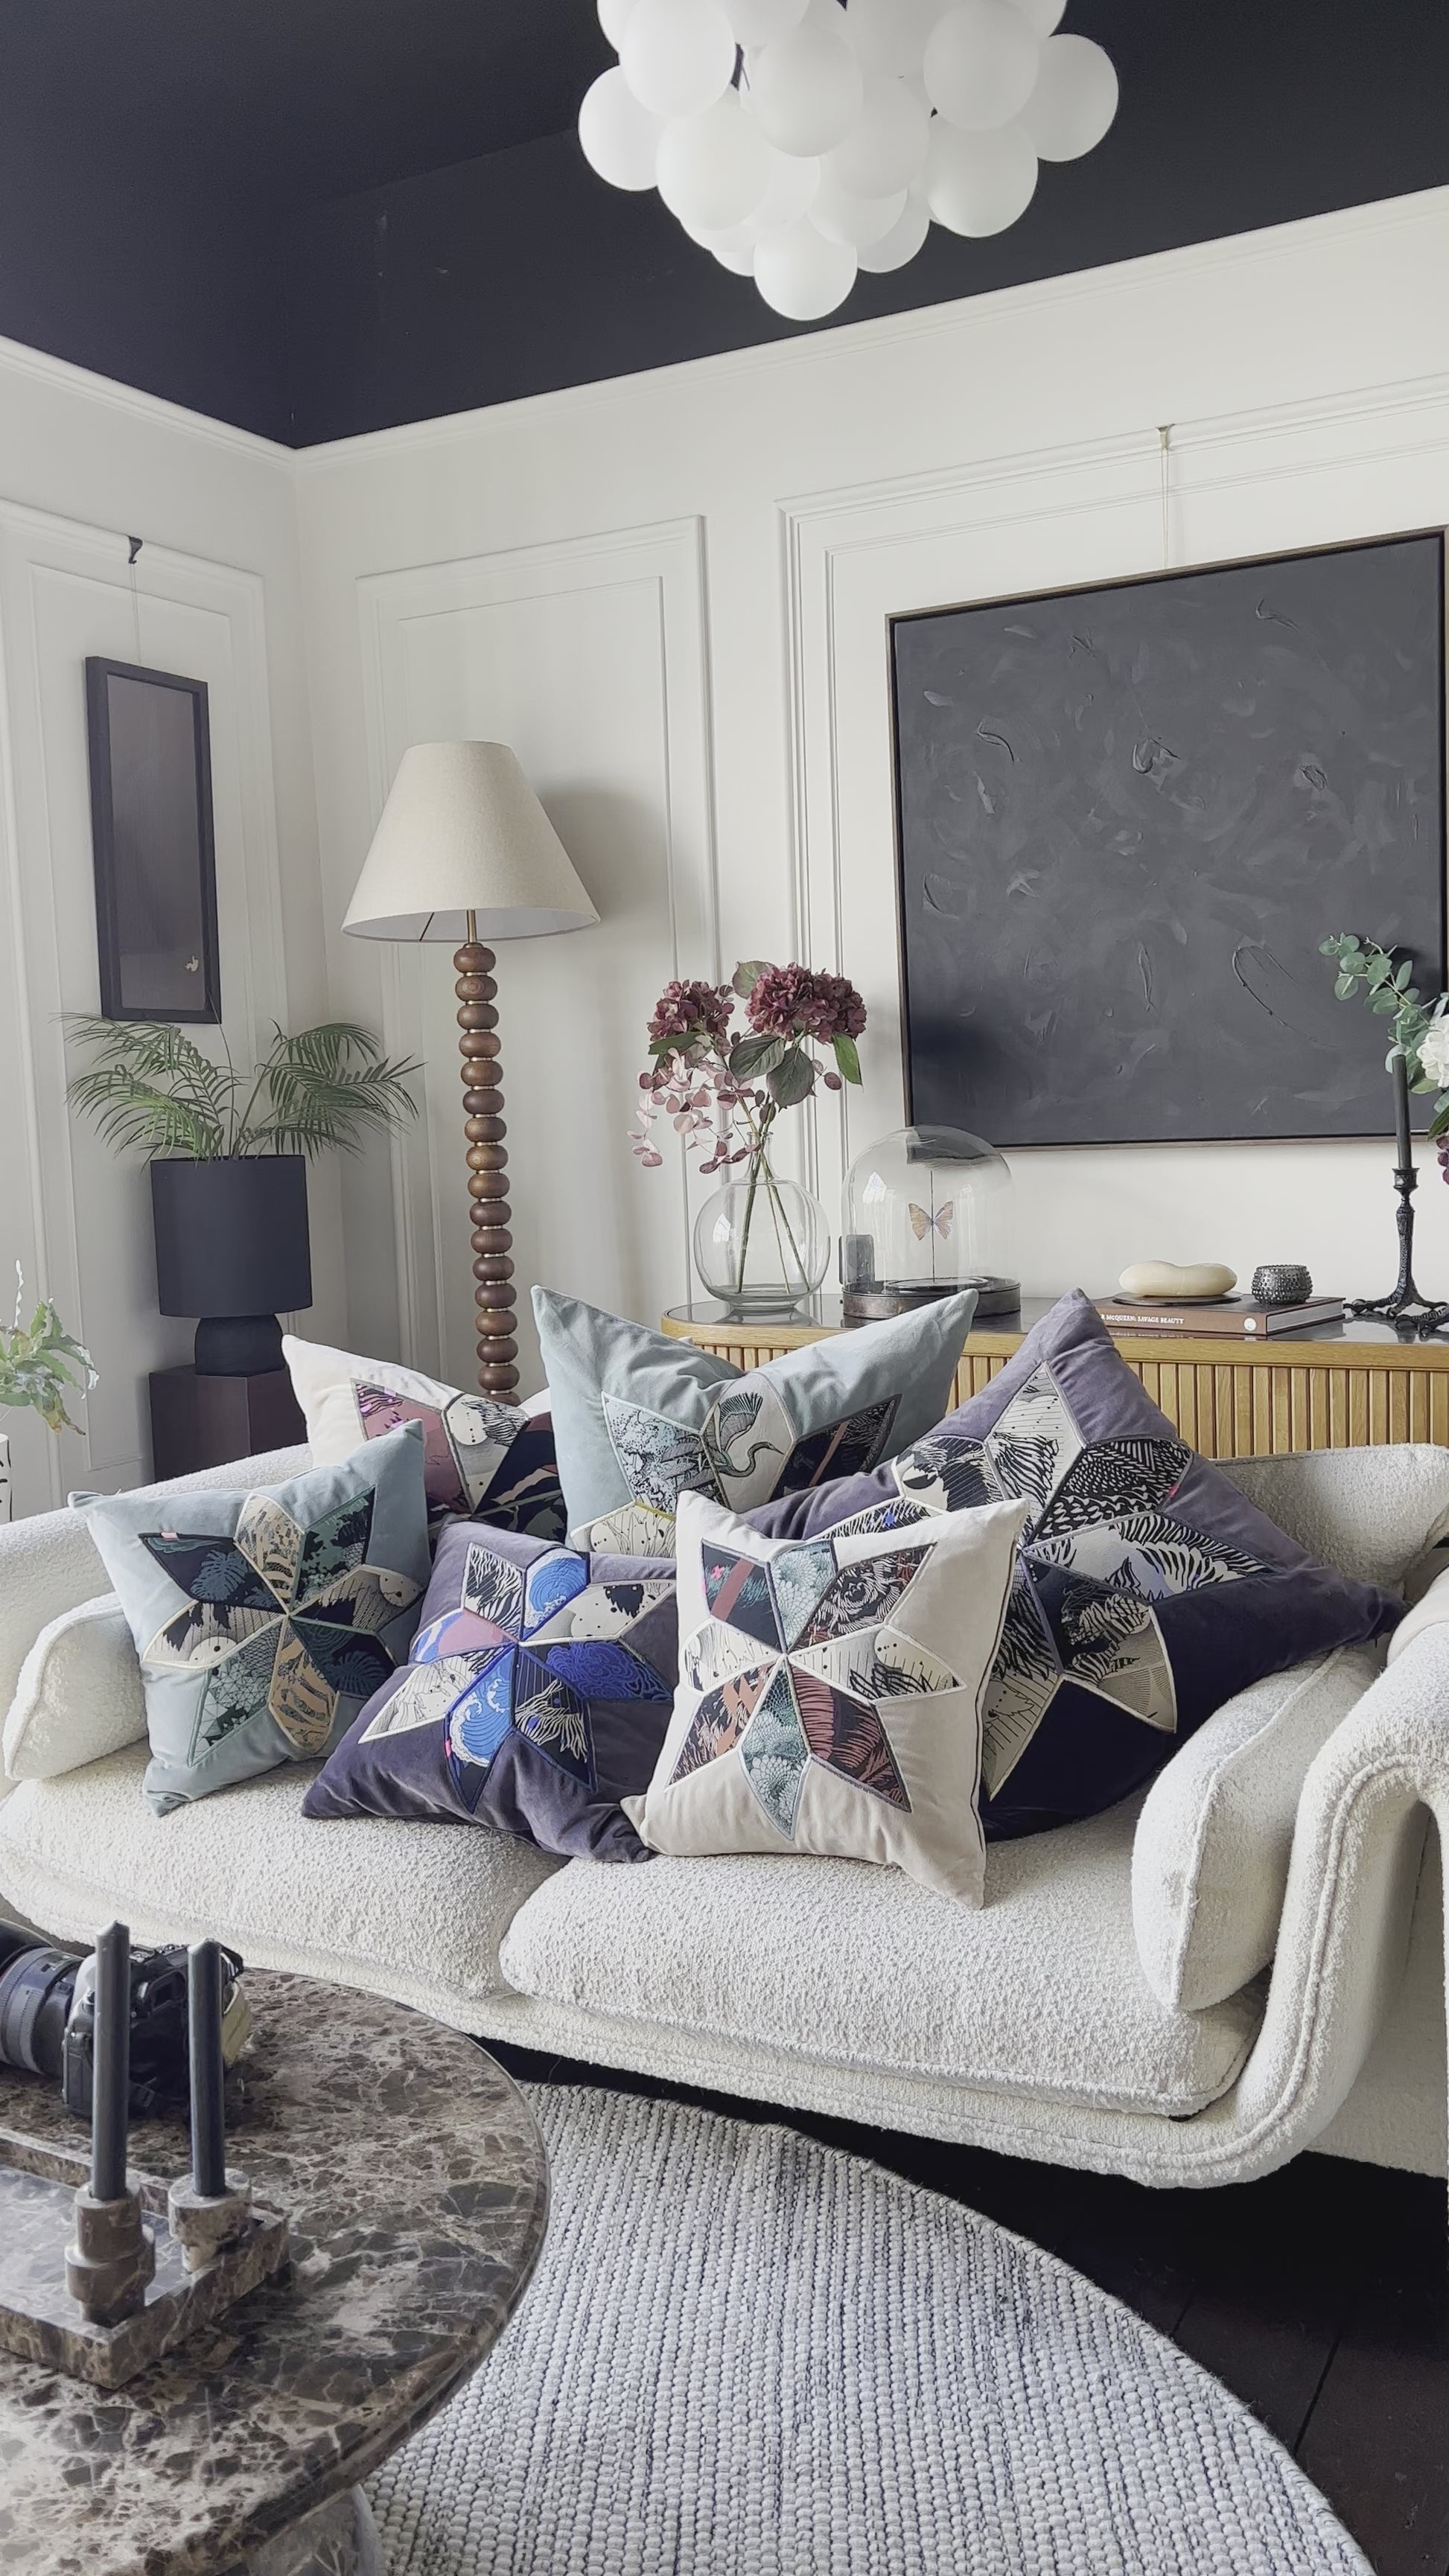 A video showing some of the cushions from the Sophie Darling & Ellie Mac collection on a sofa